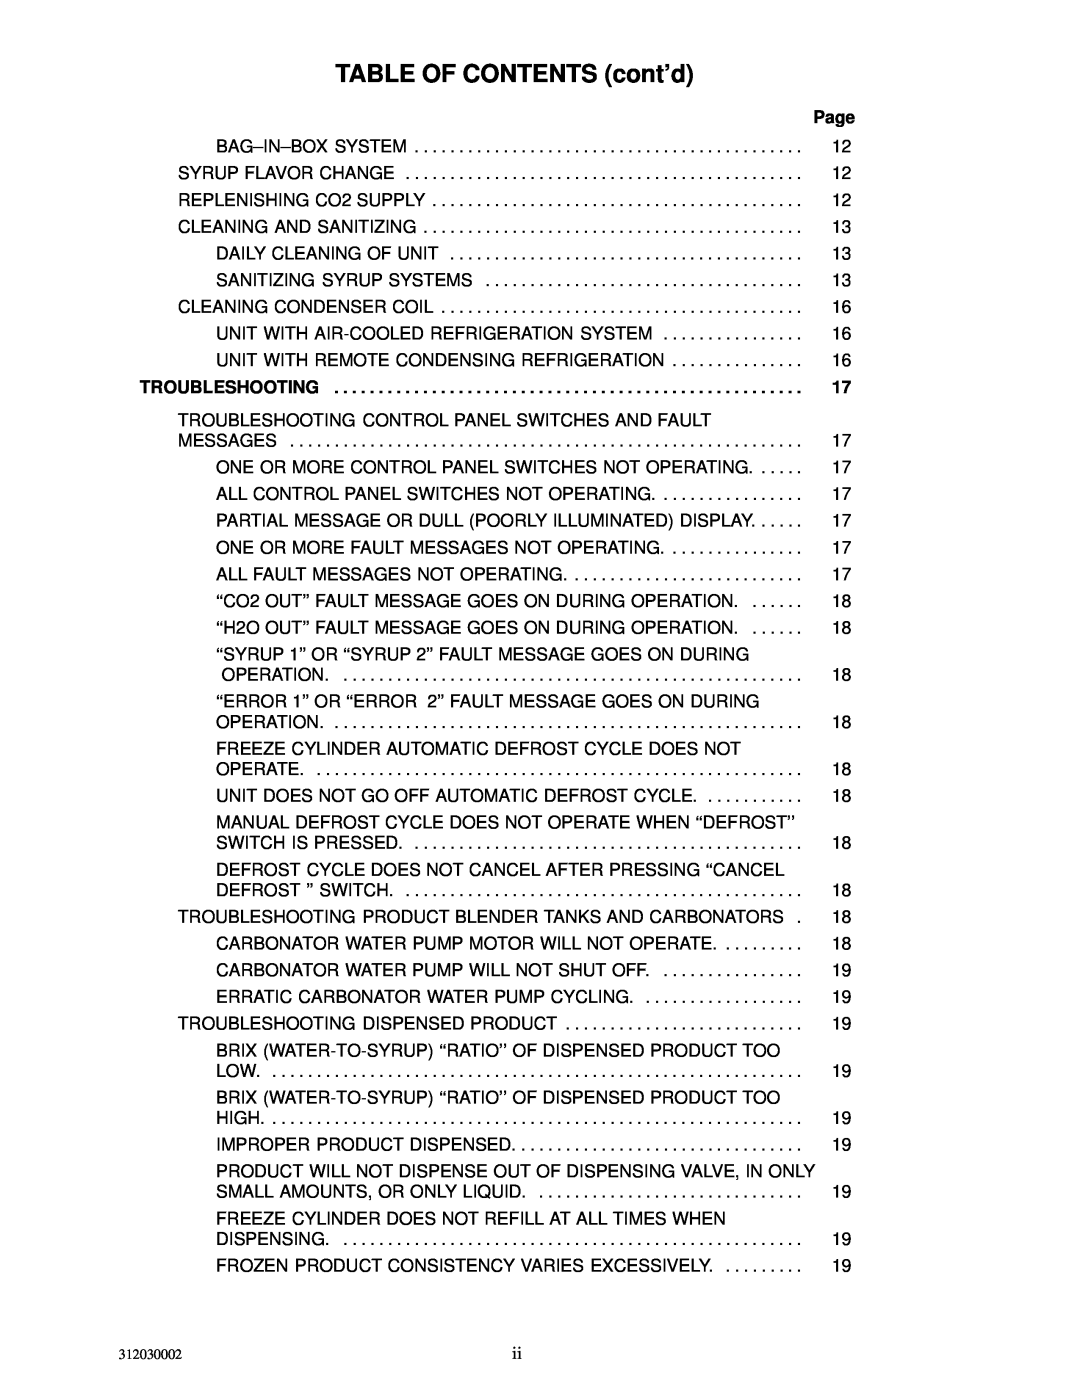 Cornelius R-404A manual TABLE OF CONTENTS cont’d, Page, Troubleshooting 